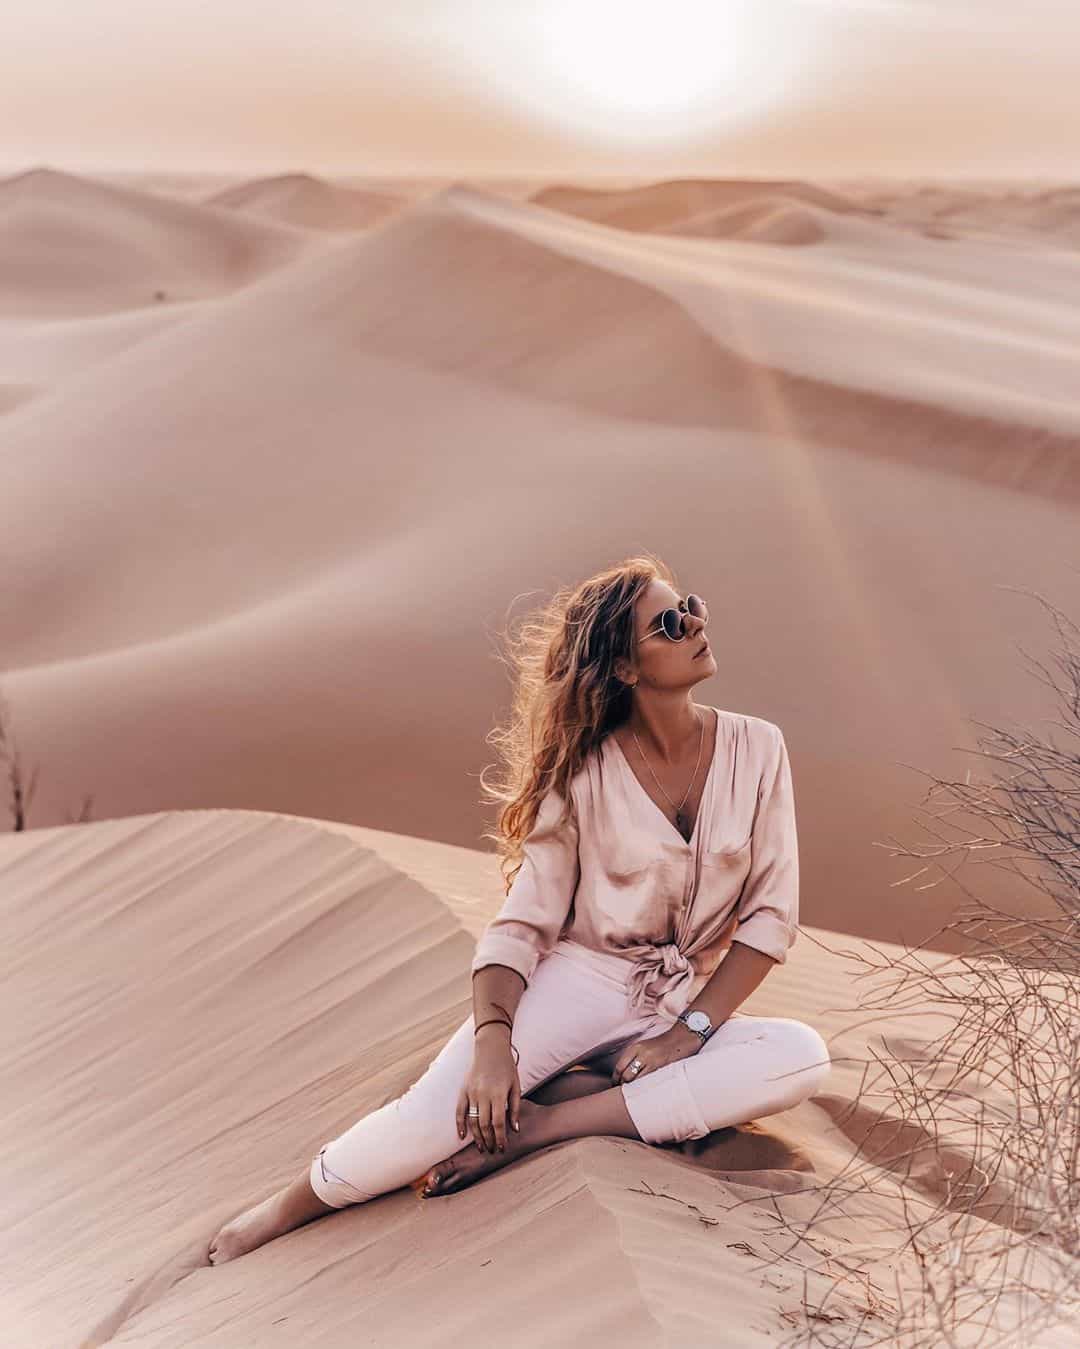 Experience the magic of the desert with our skilled female photographer. Book now to capture stunning images of your natural beauty against the breathtaking backdrop of the desert!